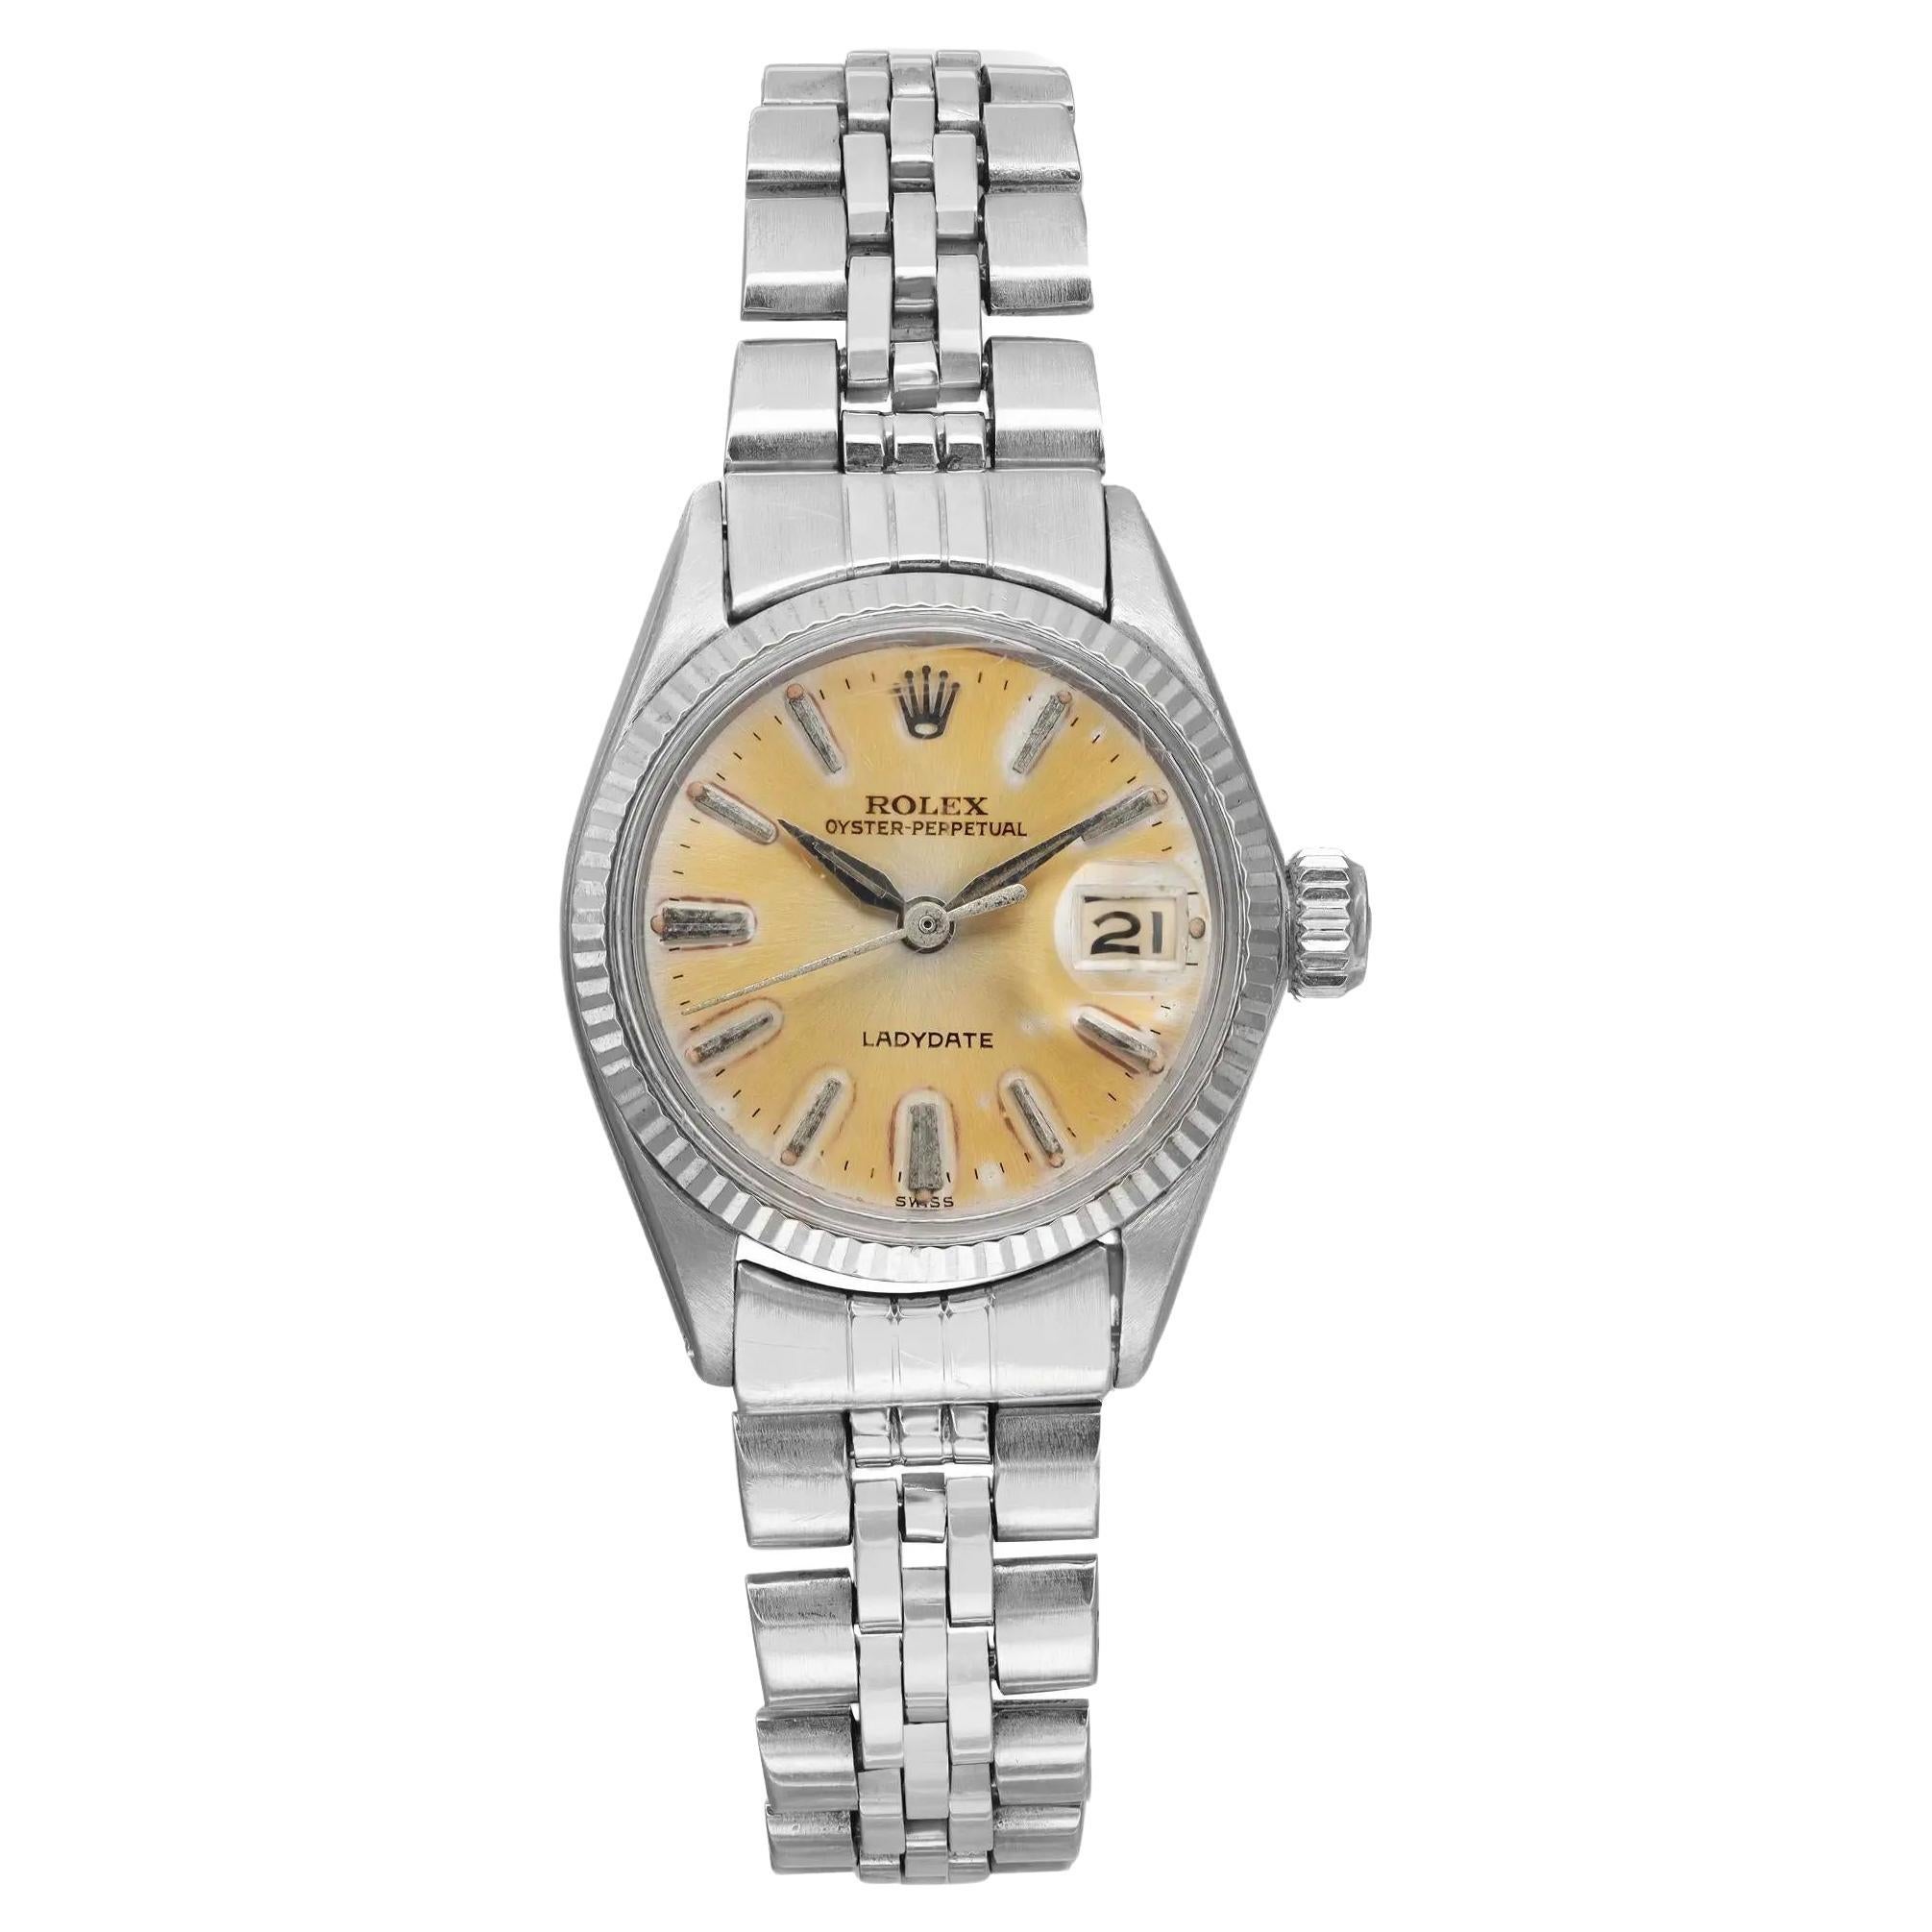 Rolex Oyster Perpetual LadyDate Steel Silver Dial Automatic Vintage Watch 6517 For Sale